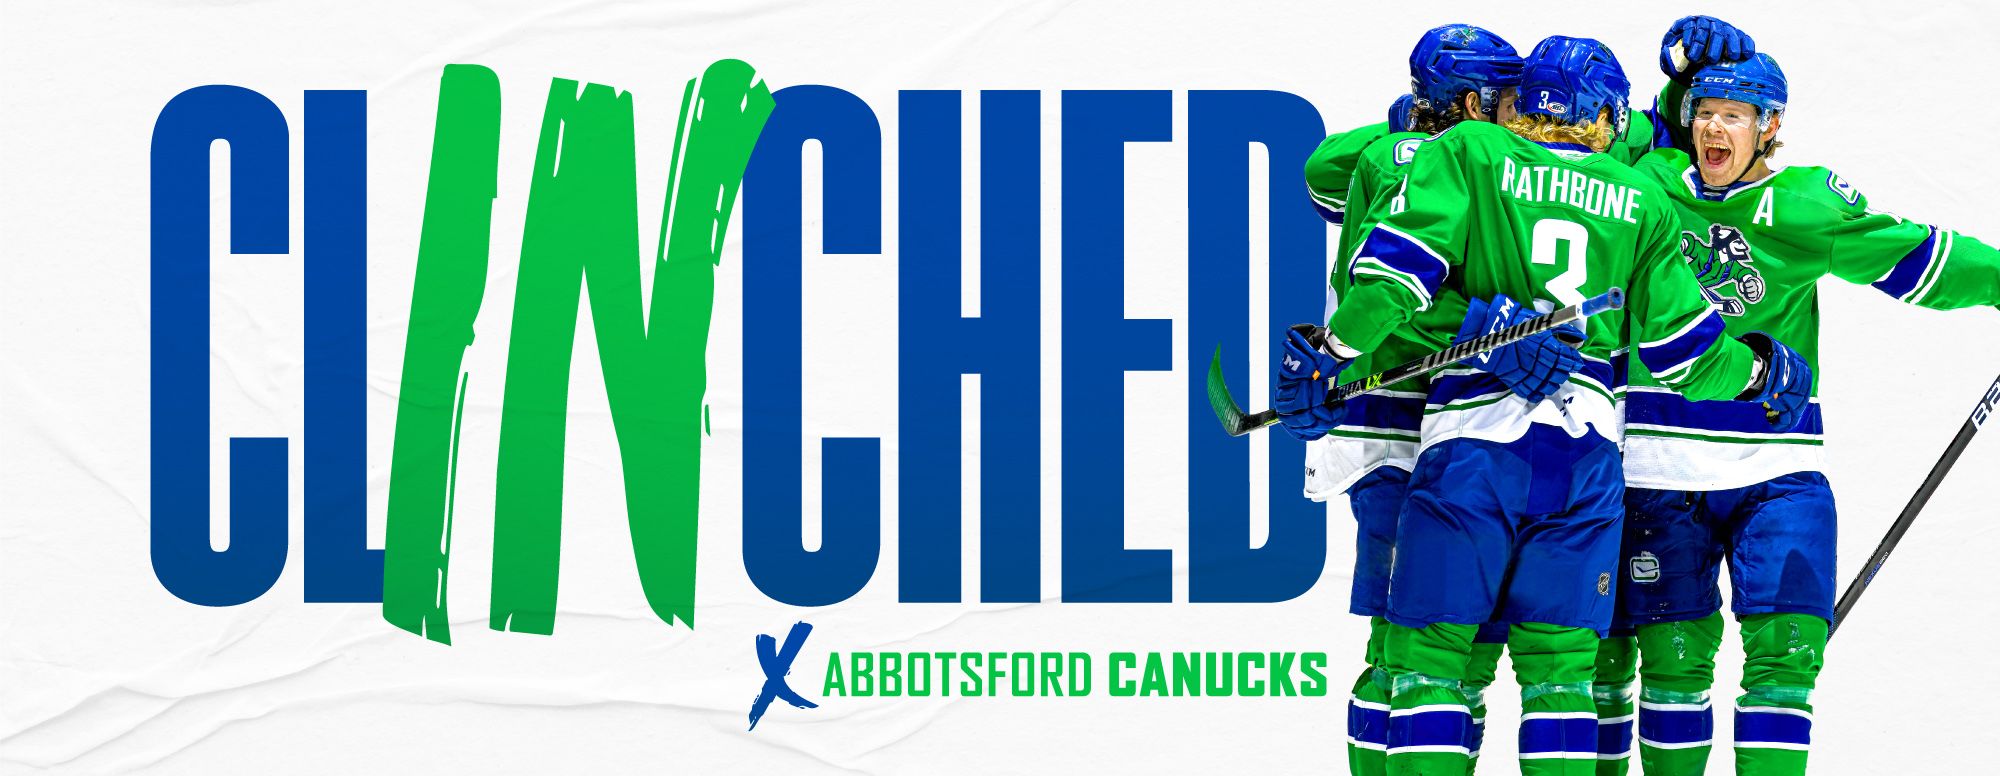 ABBOTSFORD CANUCKS PLAYOFF TICKETS ON SALE TUESDAY, APRIL 19